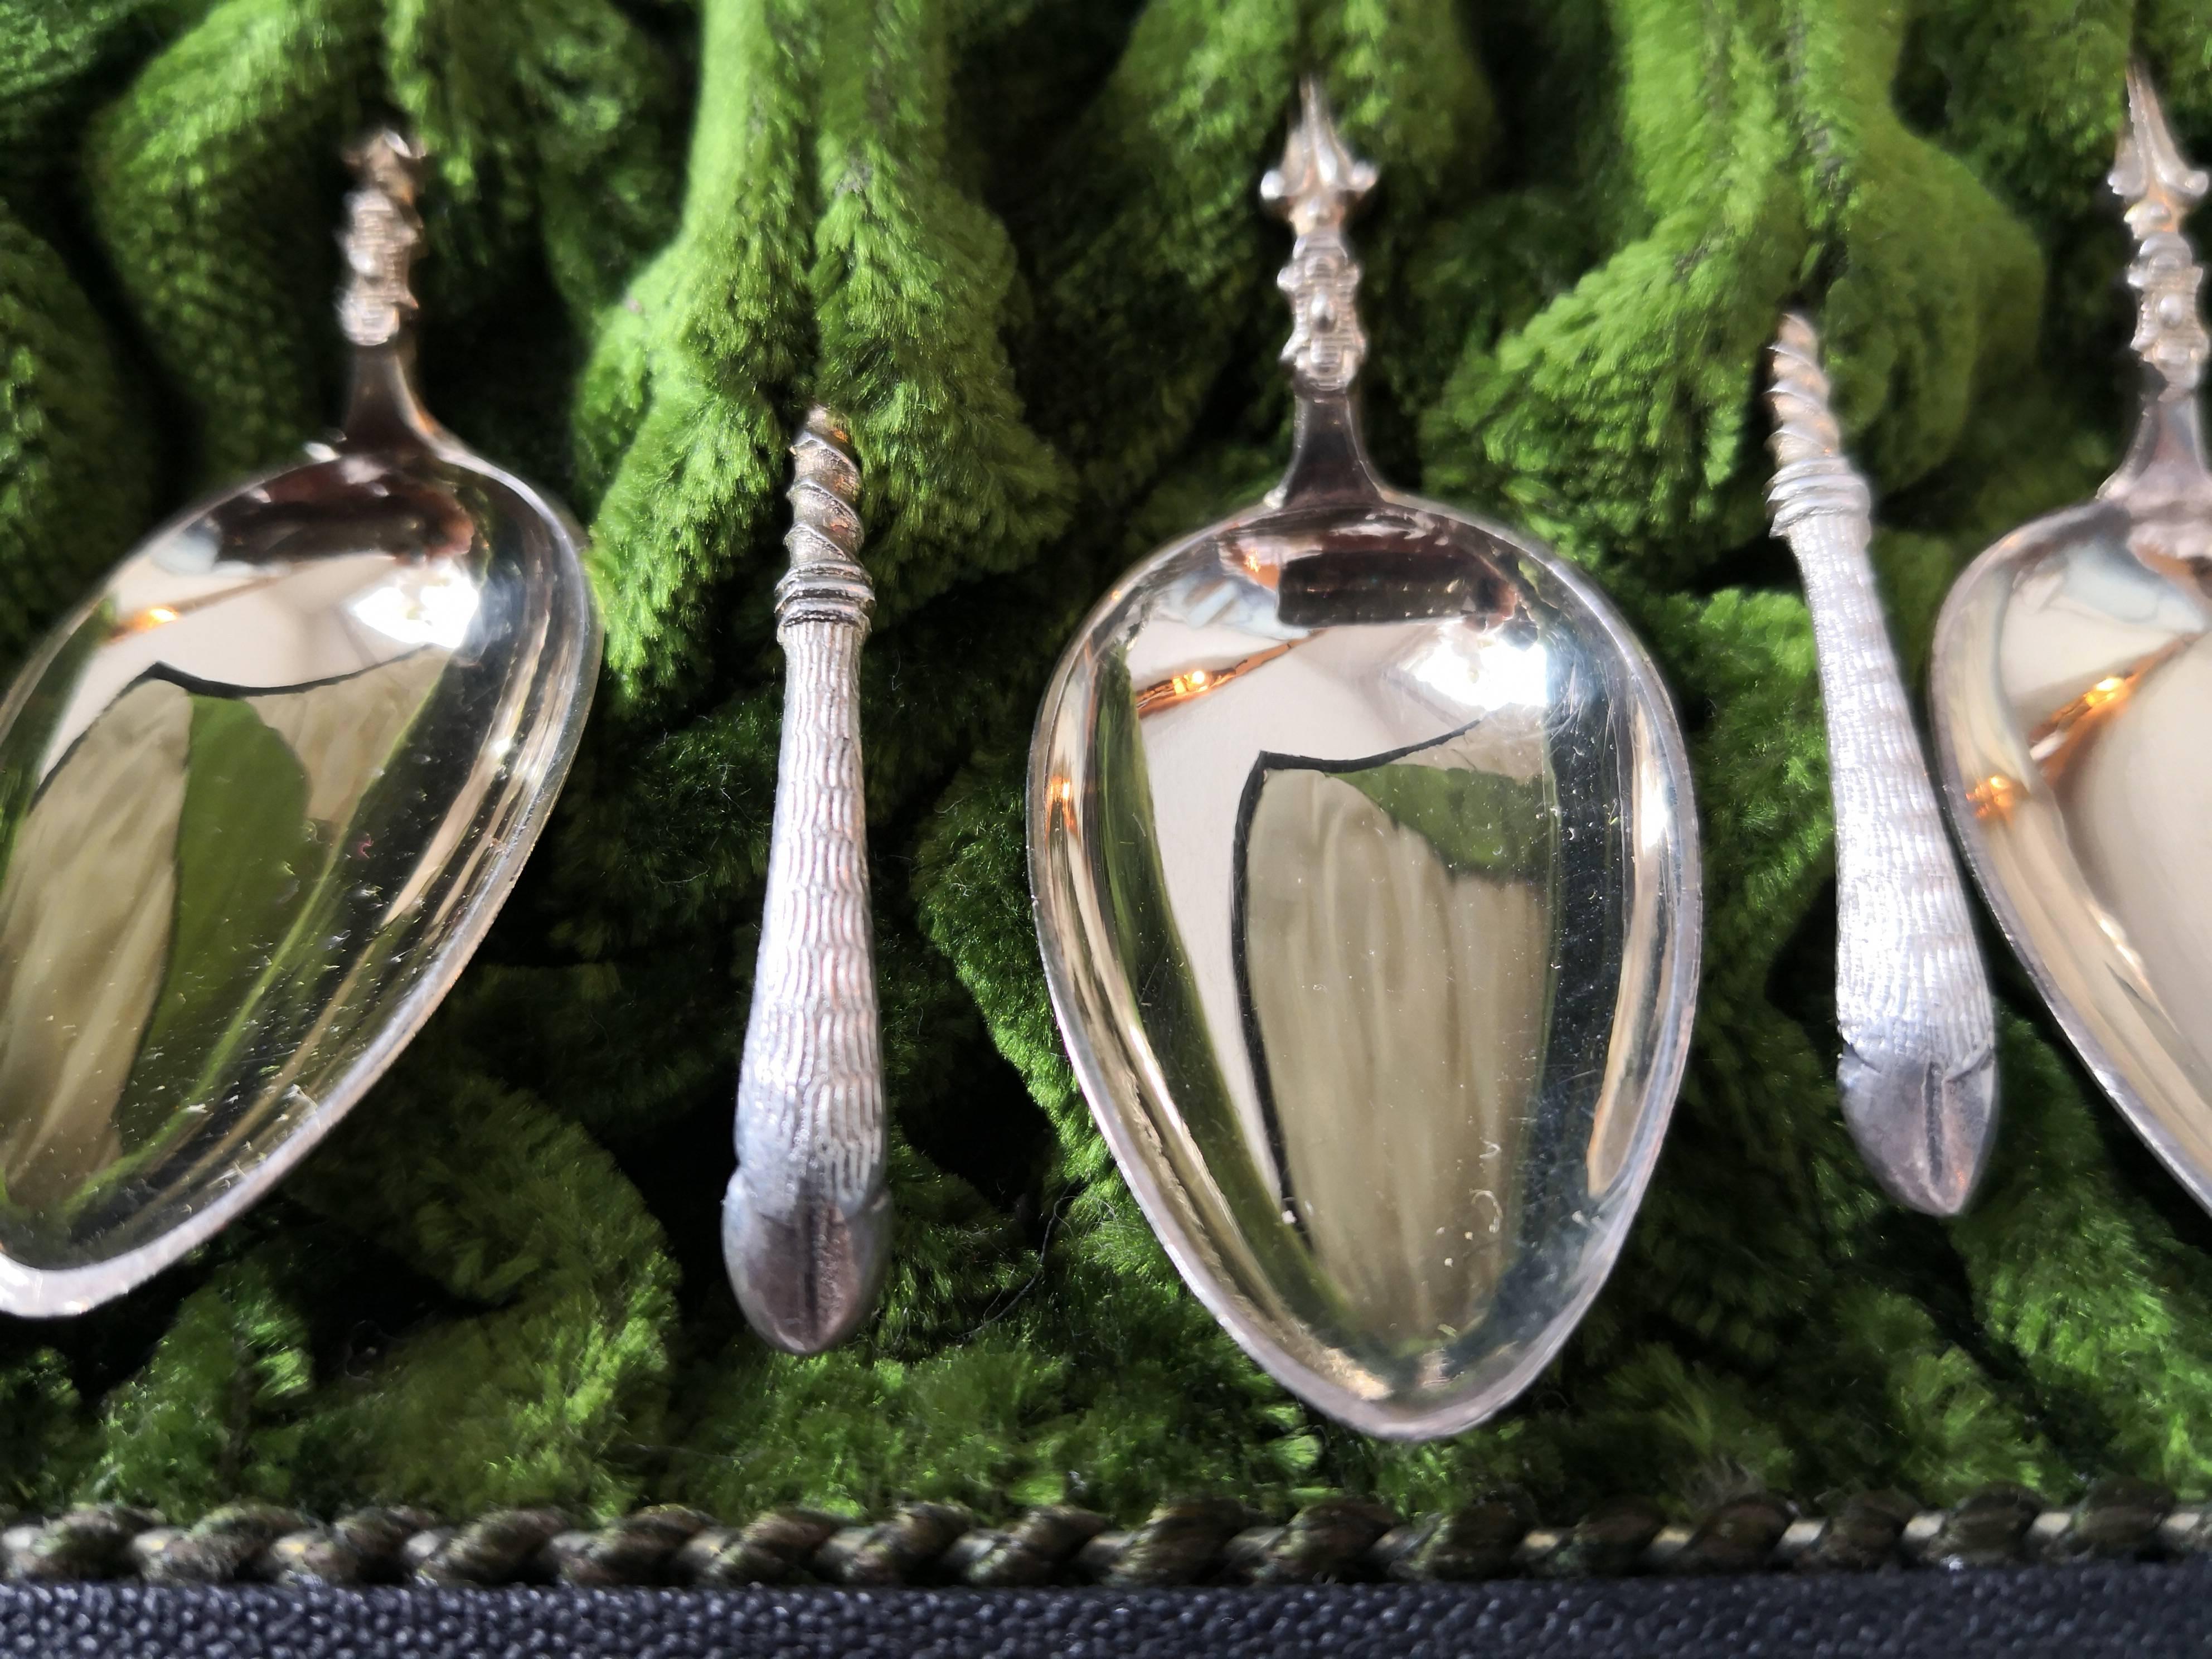 Set of 12 mocha spoons in silver with extraordinary sculptural deer hoofs at the end of the spoon. Stamped 800 silver and German hallmark crown and half moon. The set comes in original box with green velvet inside. The box is in perfect condition.